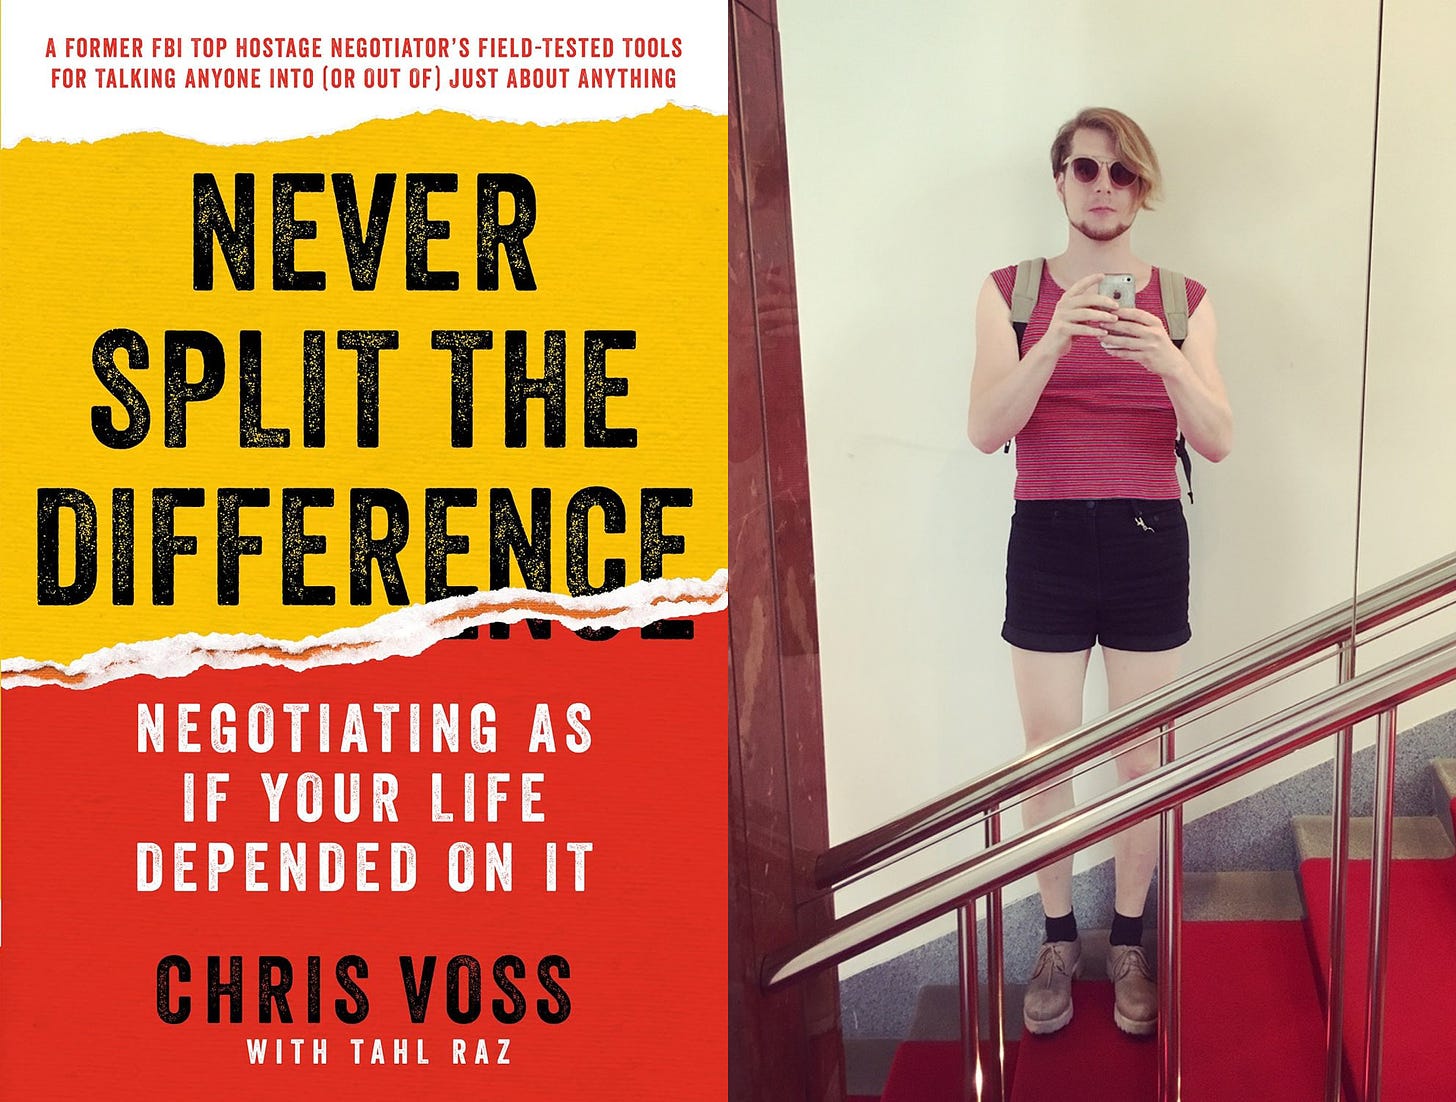 On the left: A book cover in yellow and red. The text on it reads: "A former FBI top hostage negotiator's field-tested tools for talking anyone into (or out of) just about anything. NEVER SPLIT THE DIFFERENCE. NEGOTIATING AS IF YOUR LIFE DEPENDED ON IT. CHRIS VOSS with Tahl Raz. On the right side: A photo of Fronx, the author, wearing sunglasses, black shorts and a red top standing on a set of red stairs holding a phone into a mirror to take this photo.